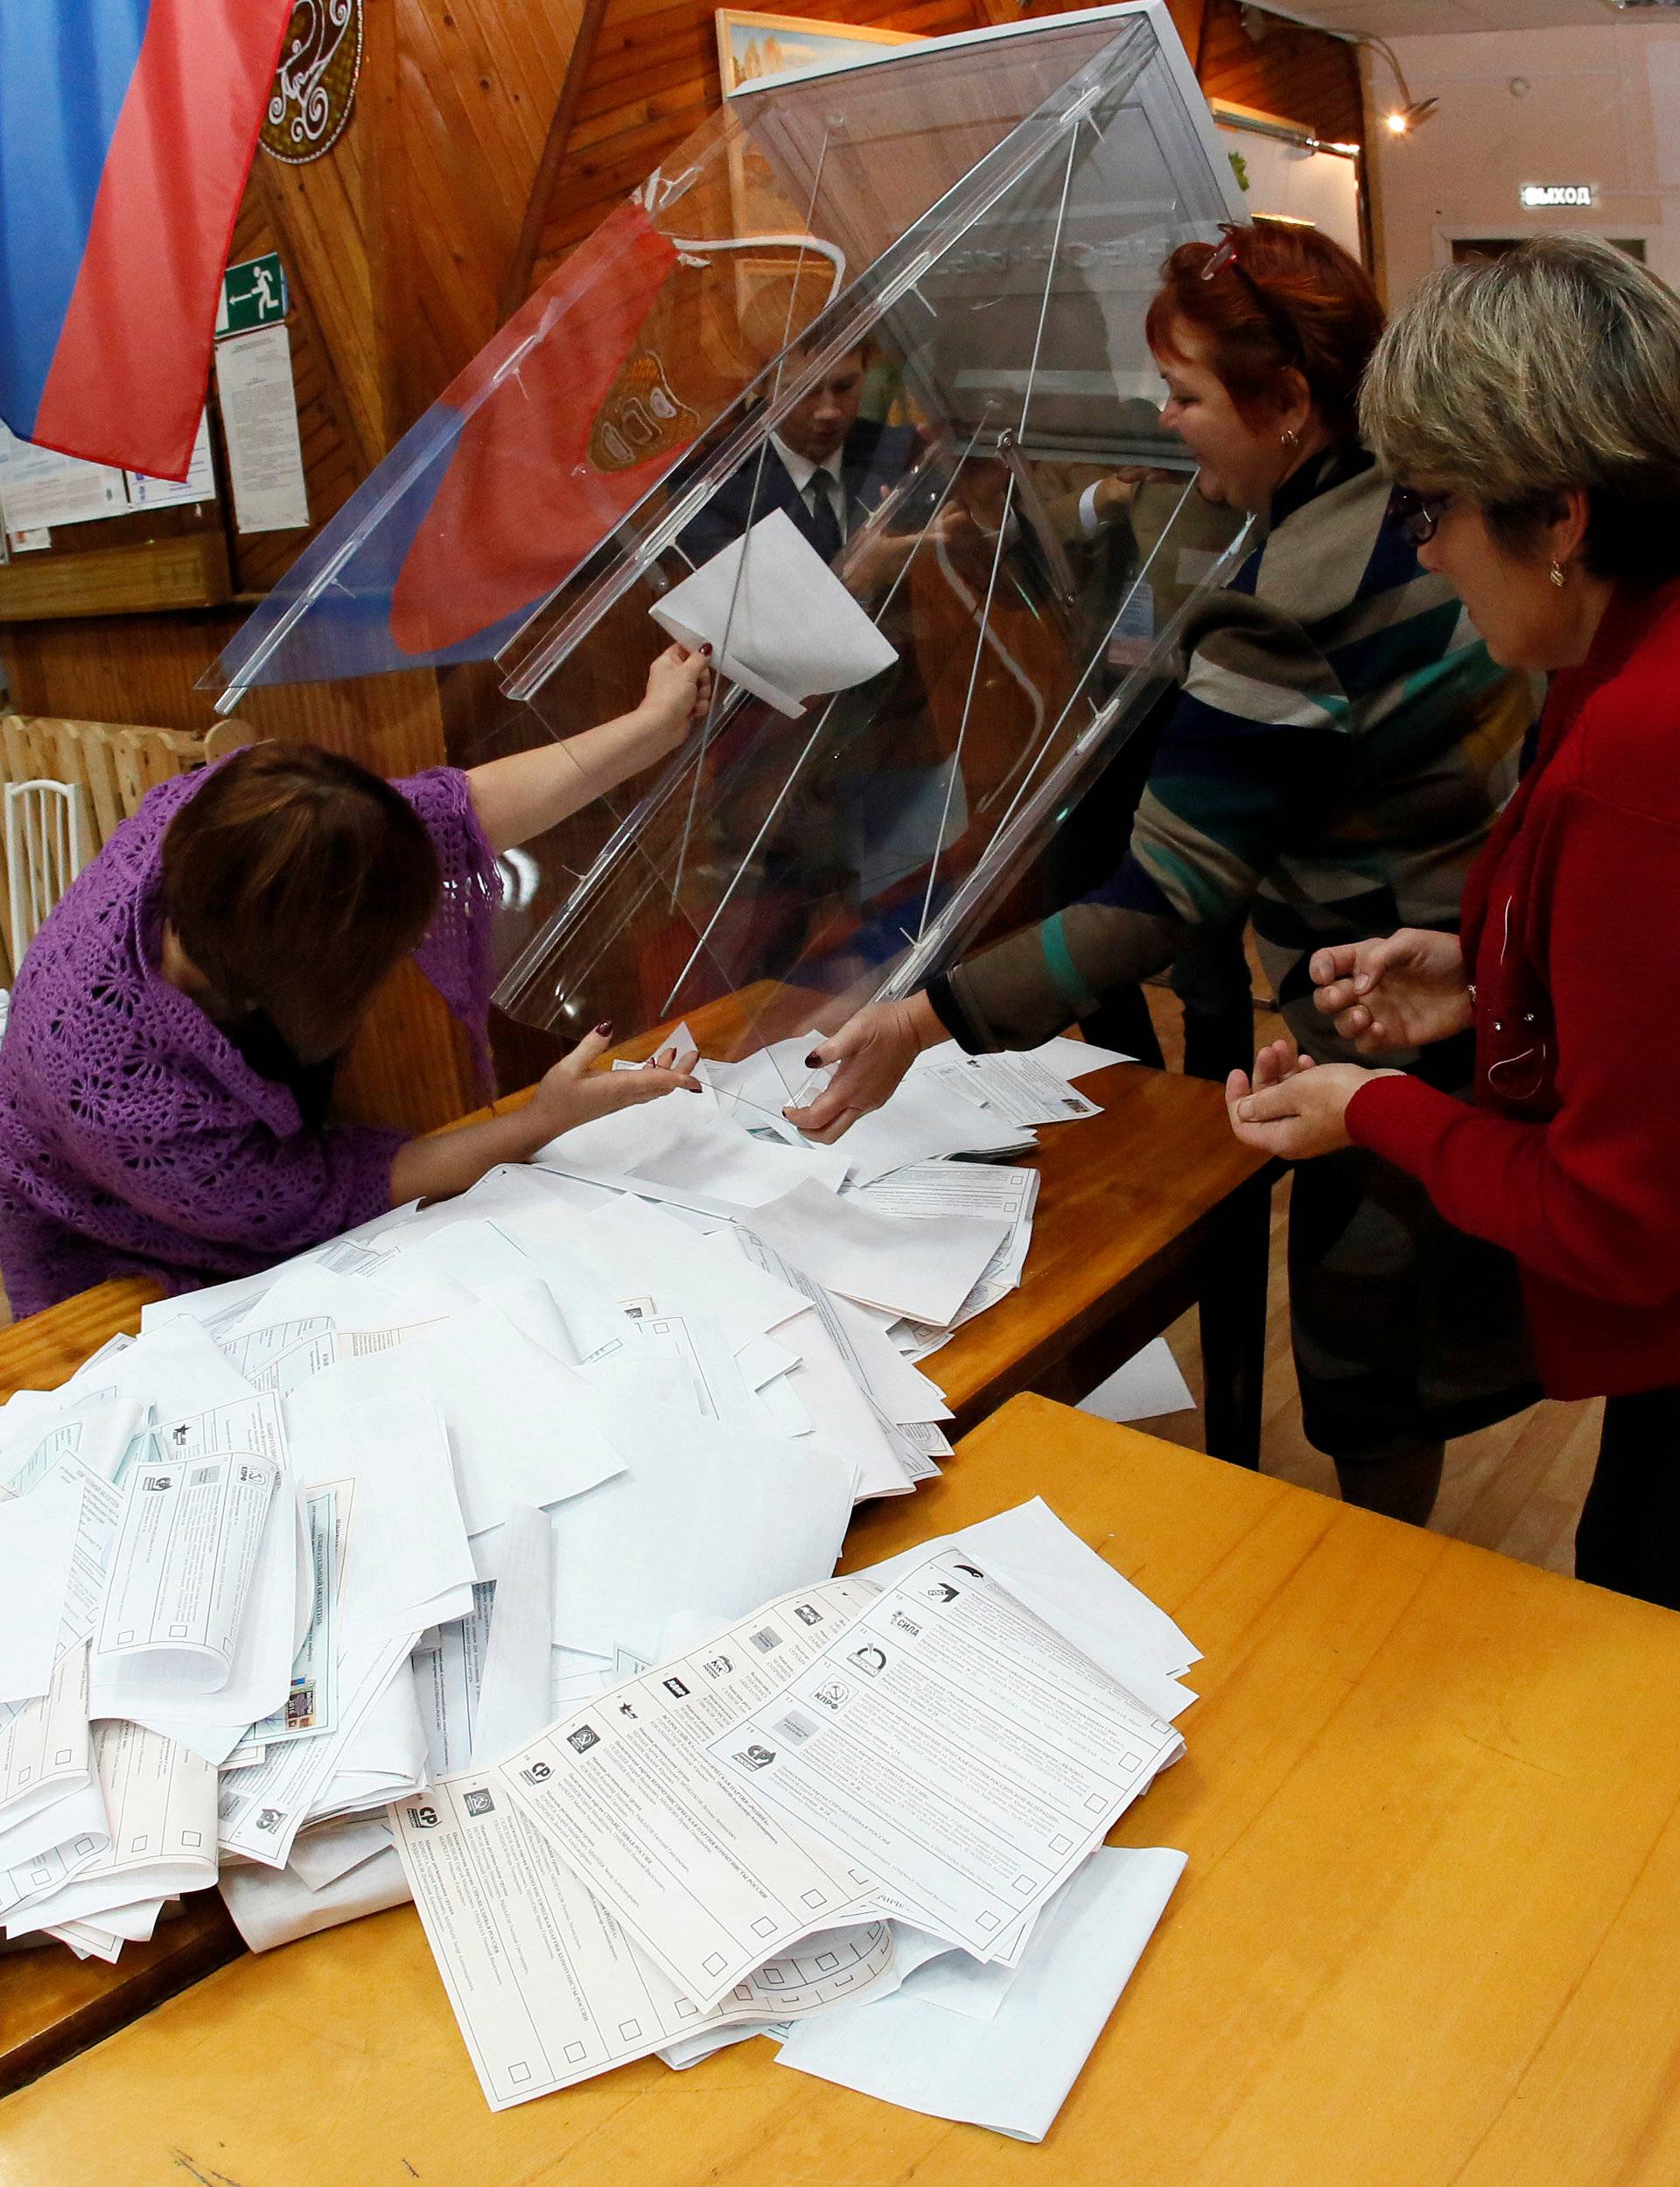 Members of local election commission empty ballot box as they start counting votes during parliamentary election in Ust-Mana outside Krasnoyarsk